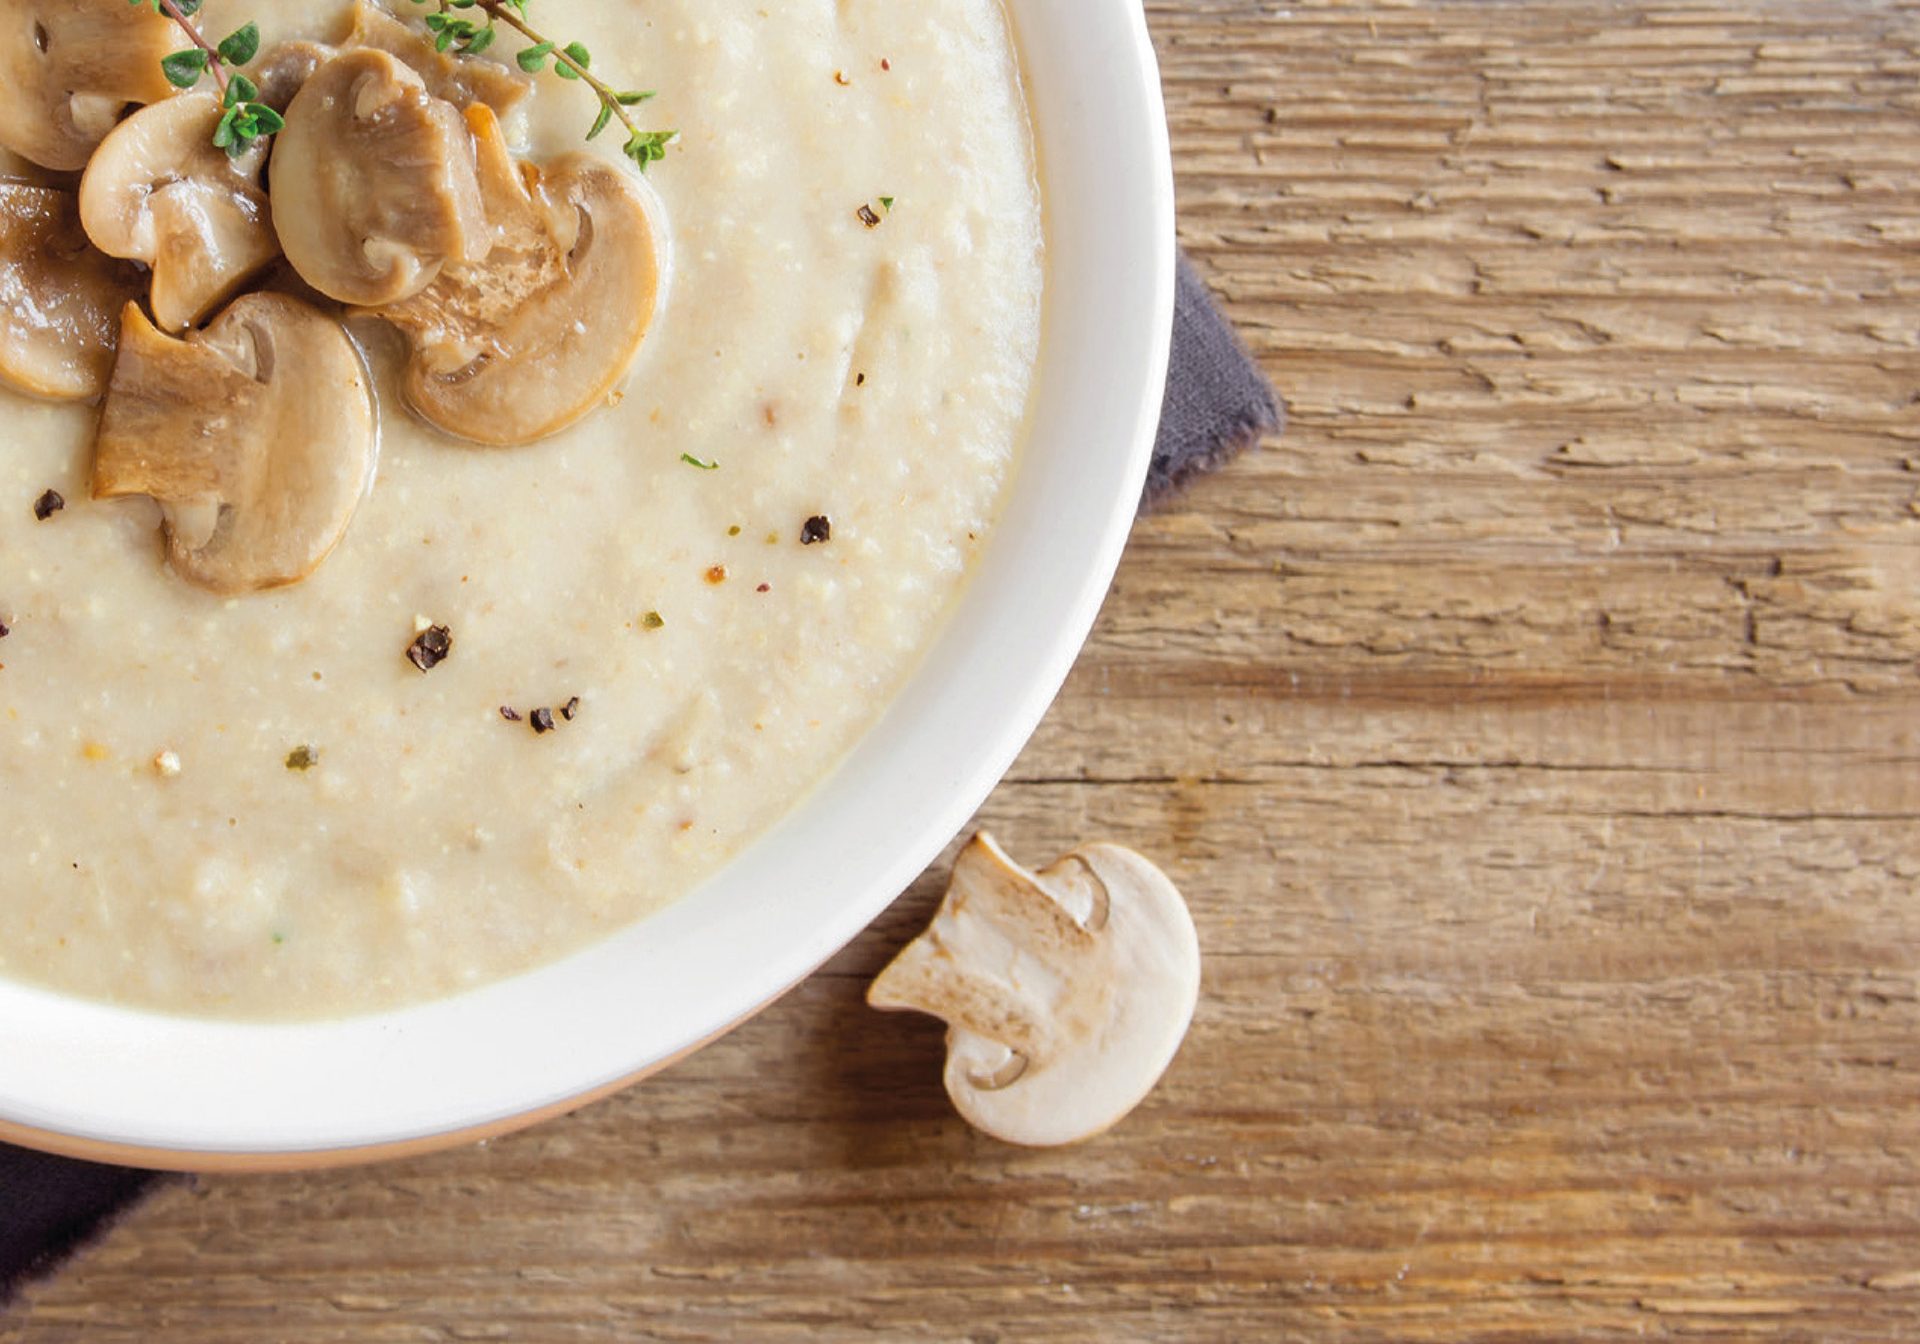 beige puree with mushrooms and thyme in a bowl on a wooden table